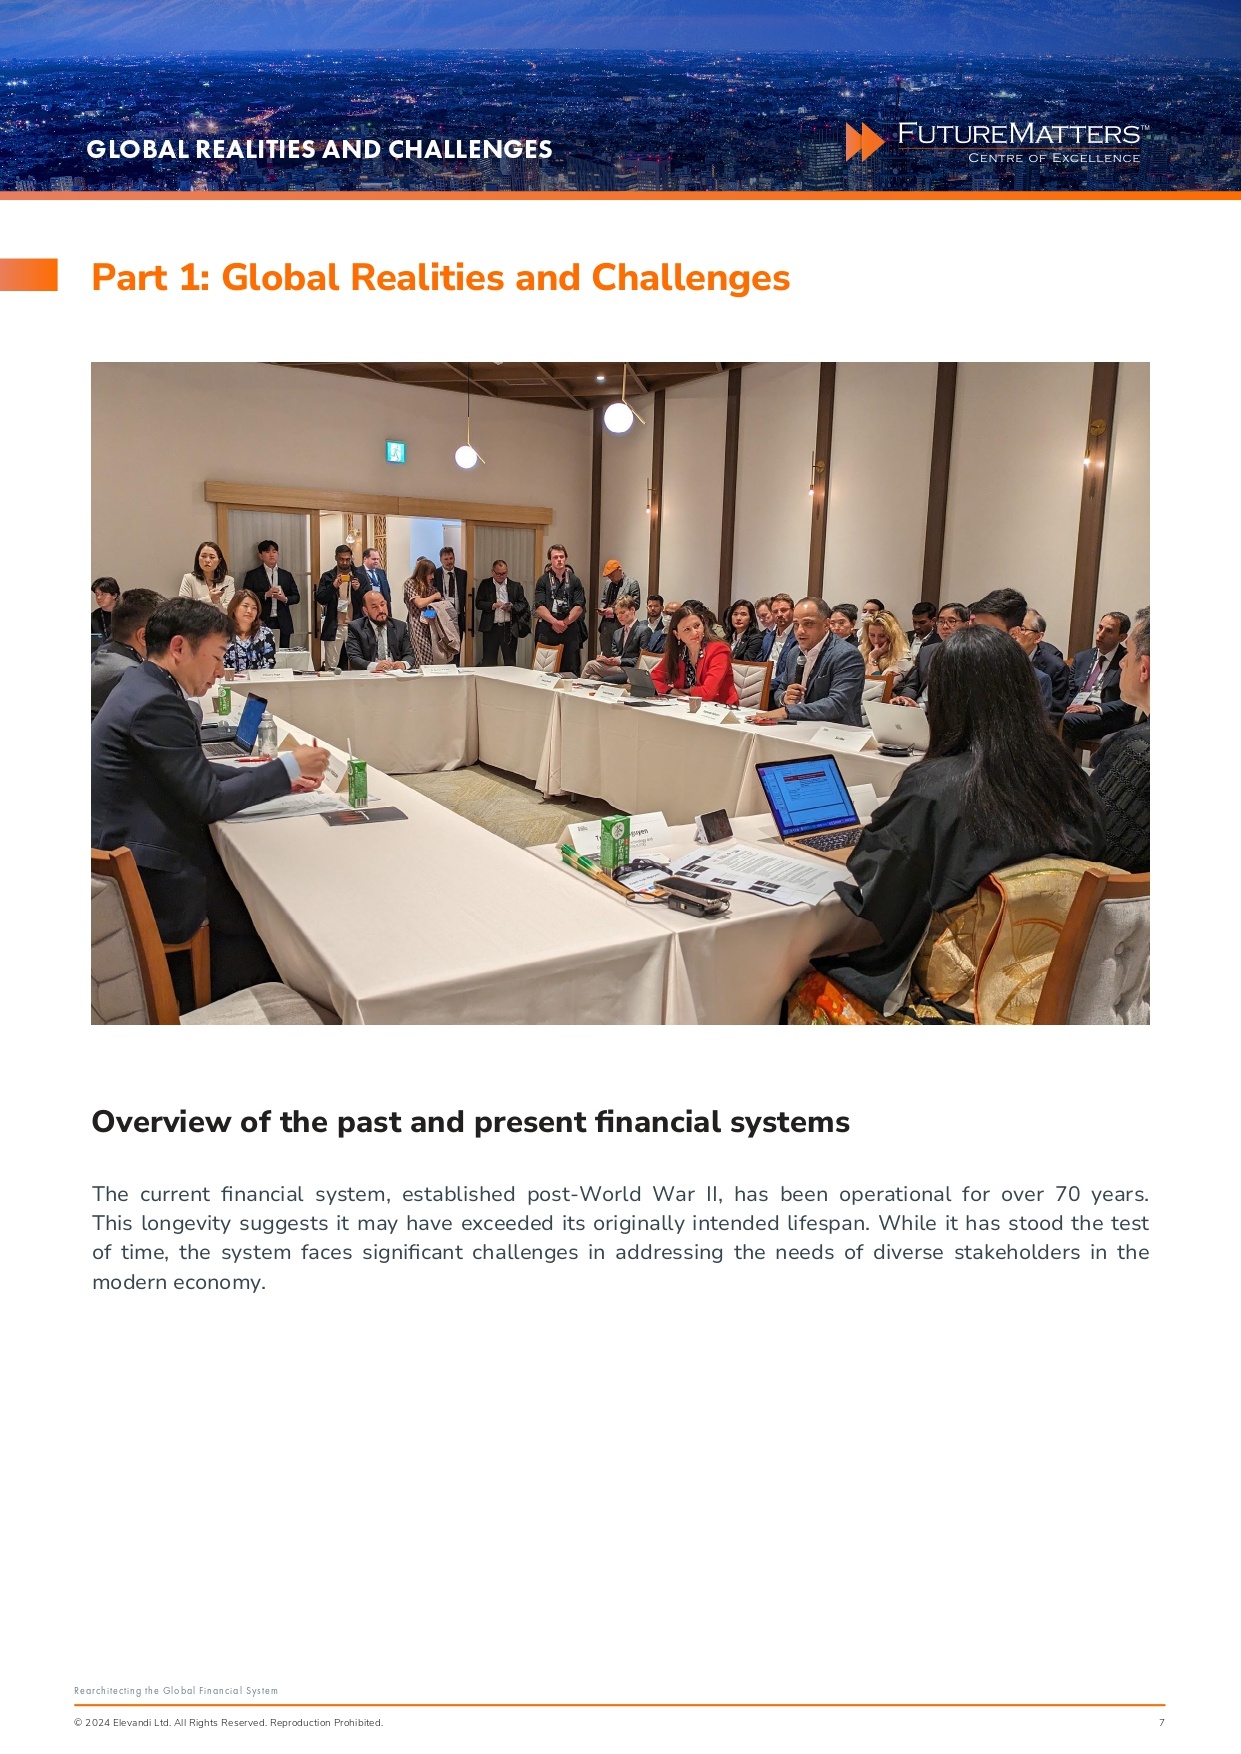 Rearchitecting the global financial system_FM report_17Jul_FINAL (3)_page-0007